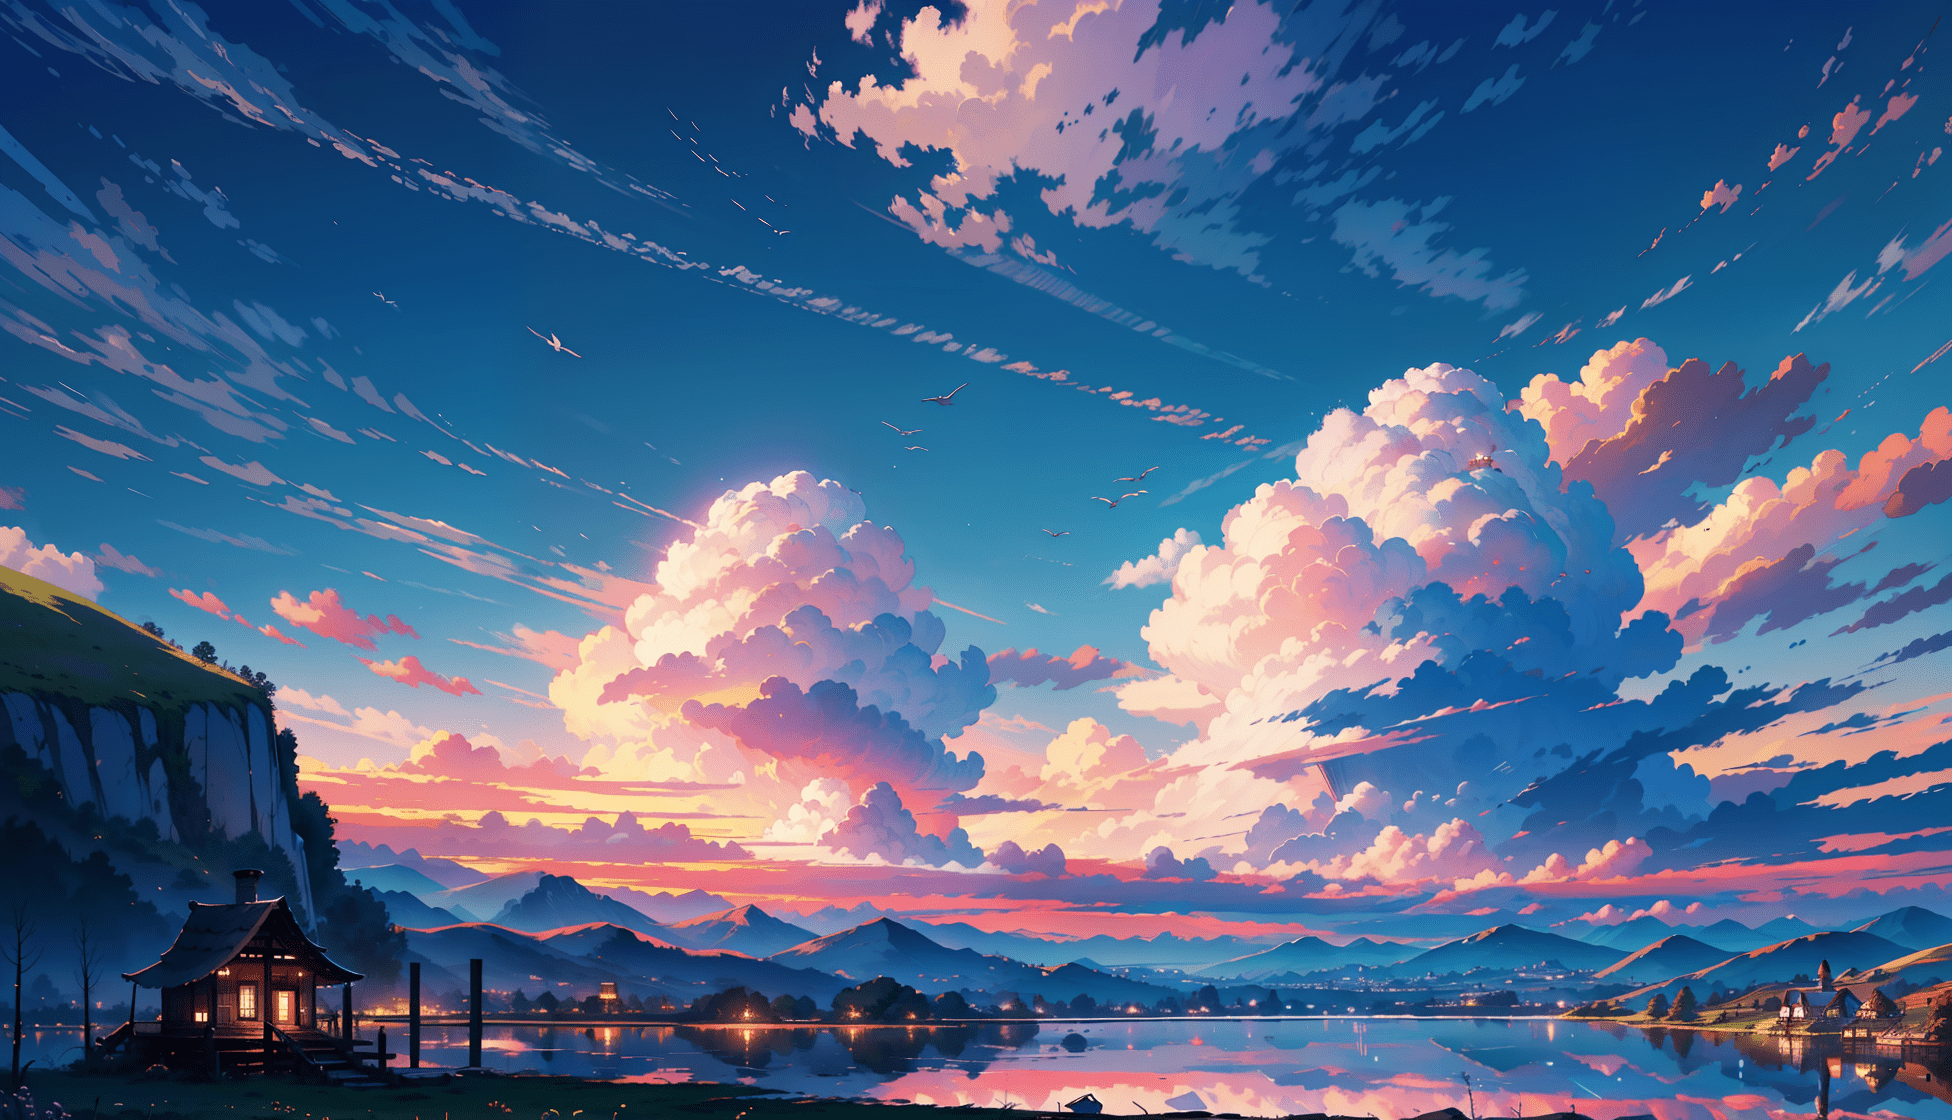 The sky is filled with clouds and there is a building - Anime landscape